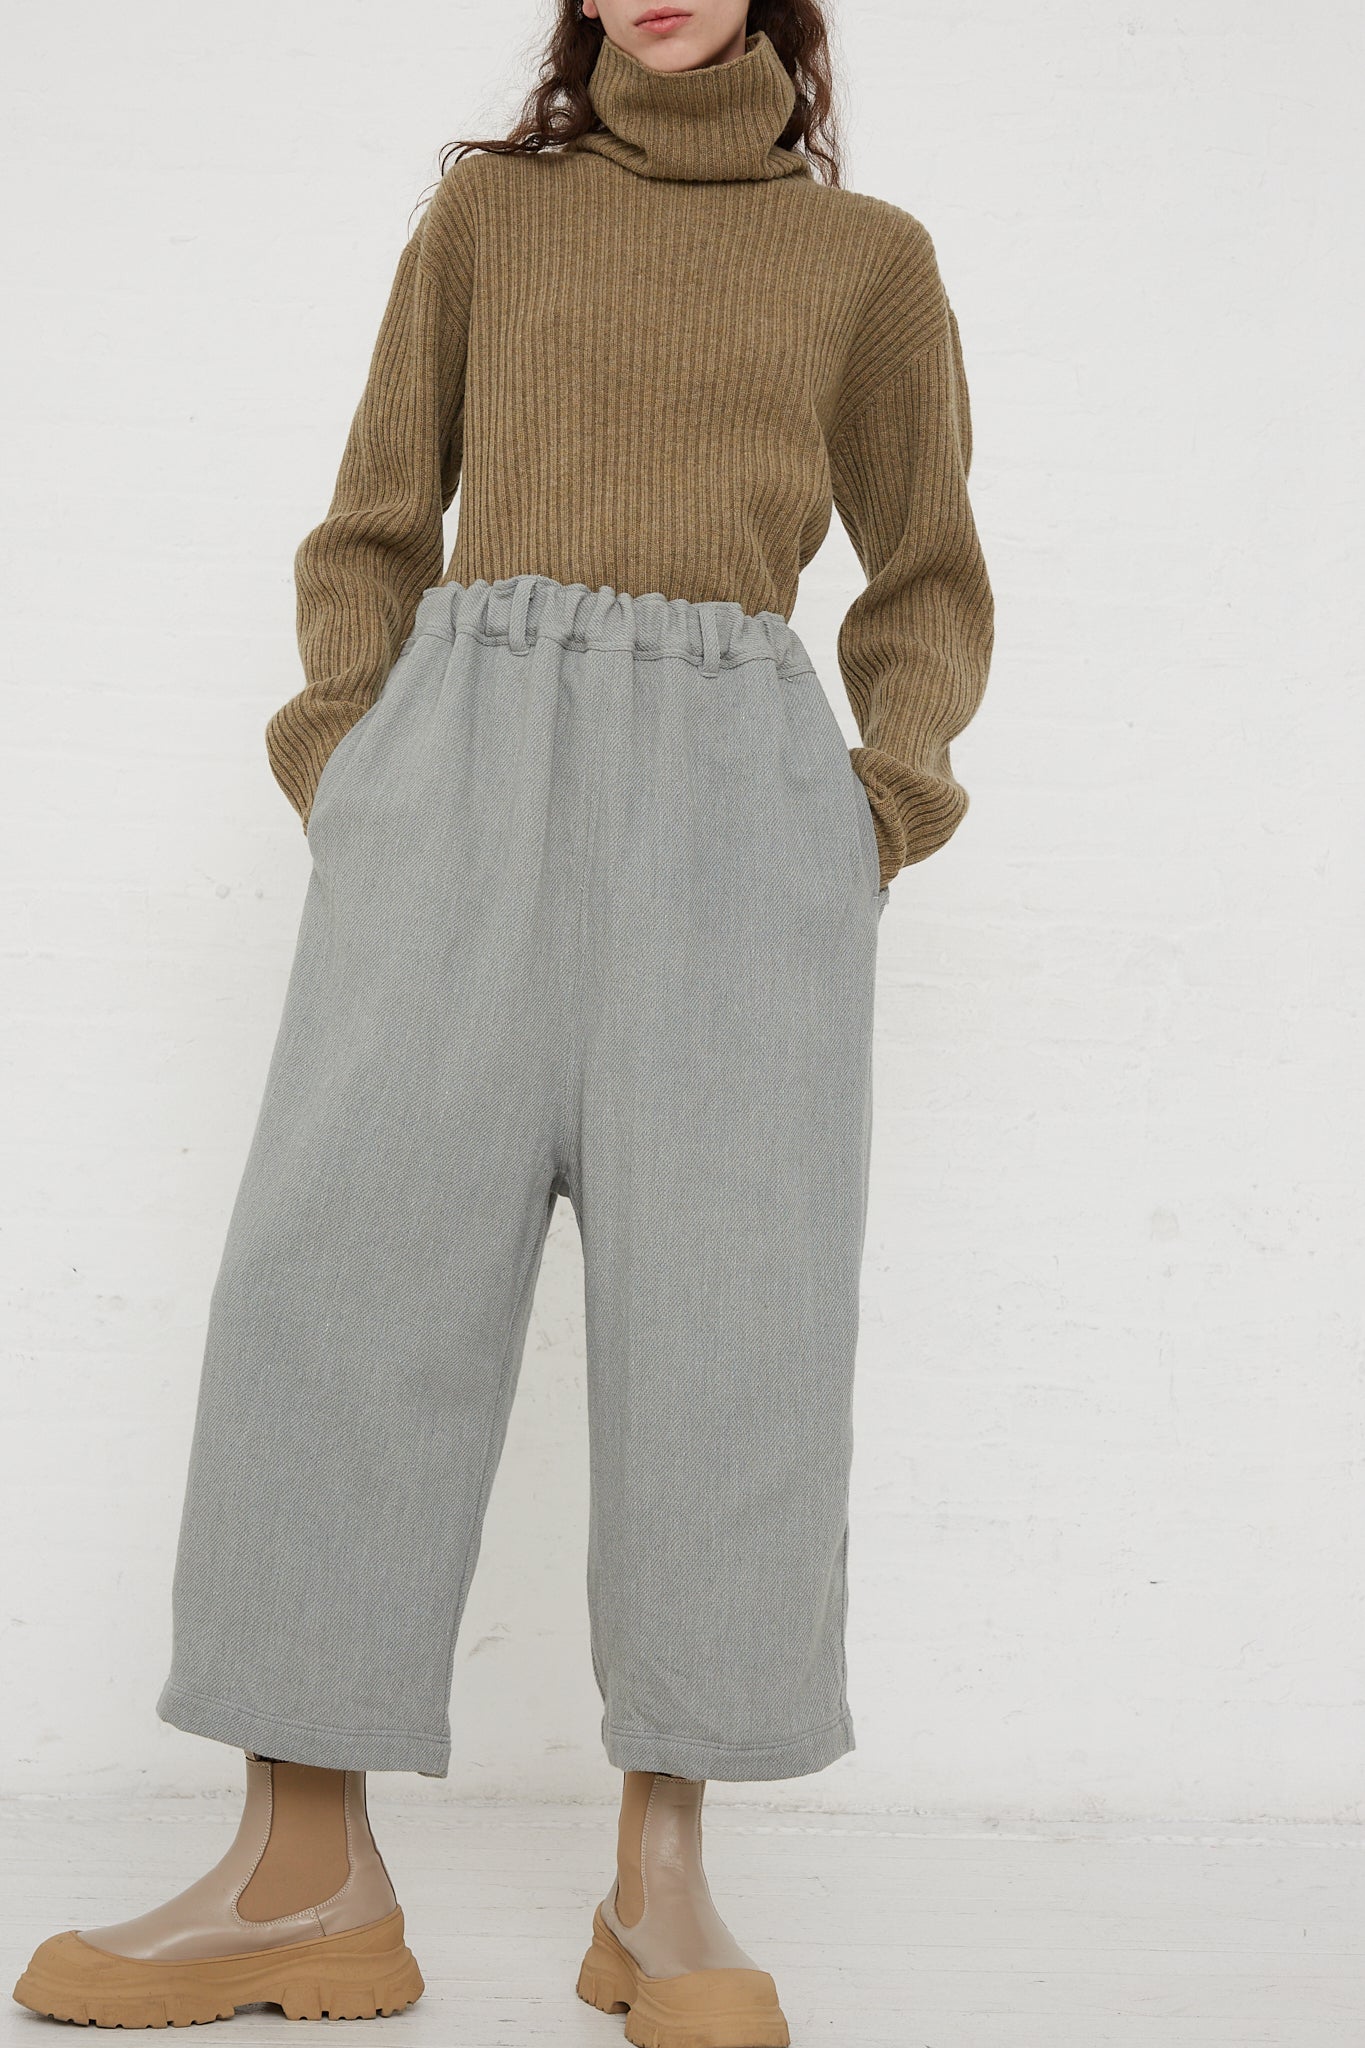 The model is wearing a Merino Wool Orihimedaki Pant in Blue and grey wide leg pants with an elasticated waist.